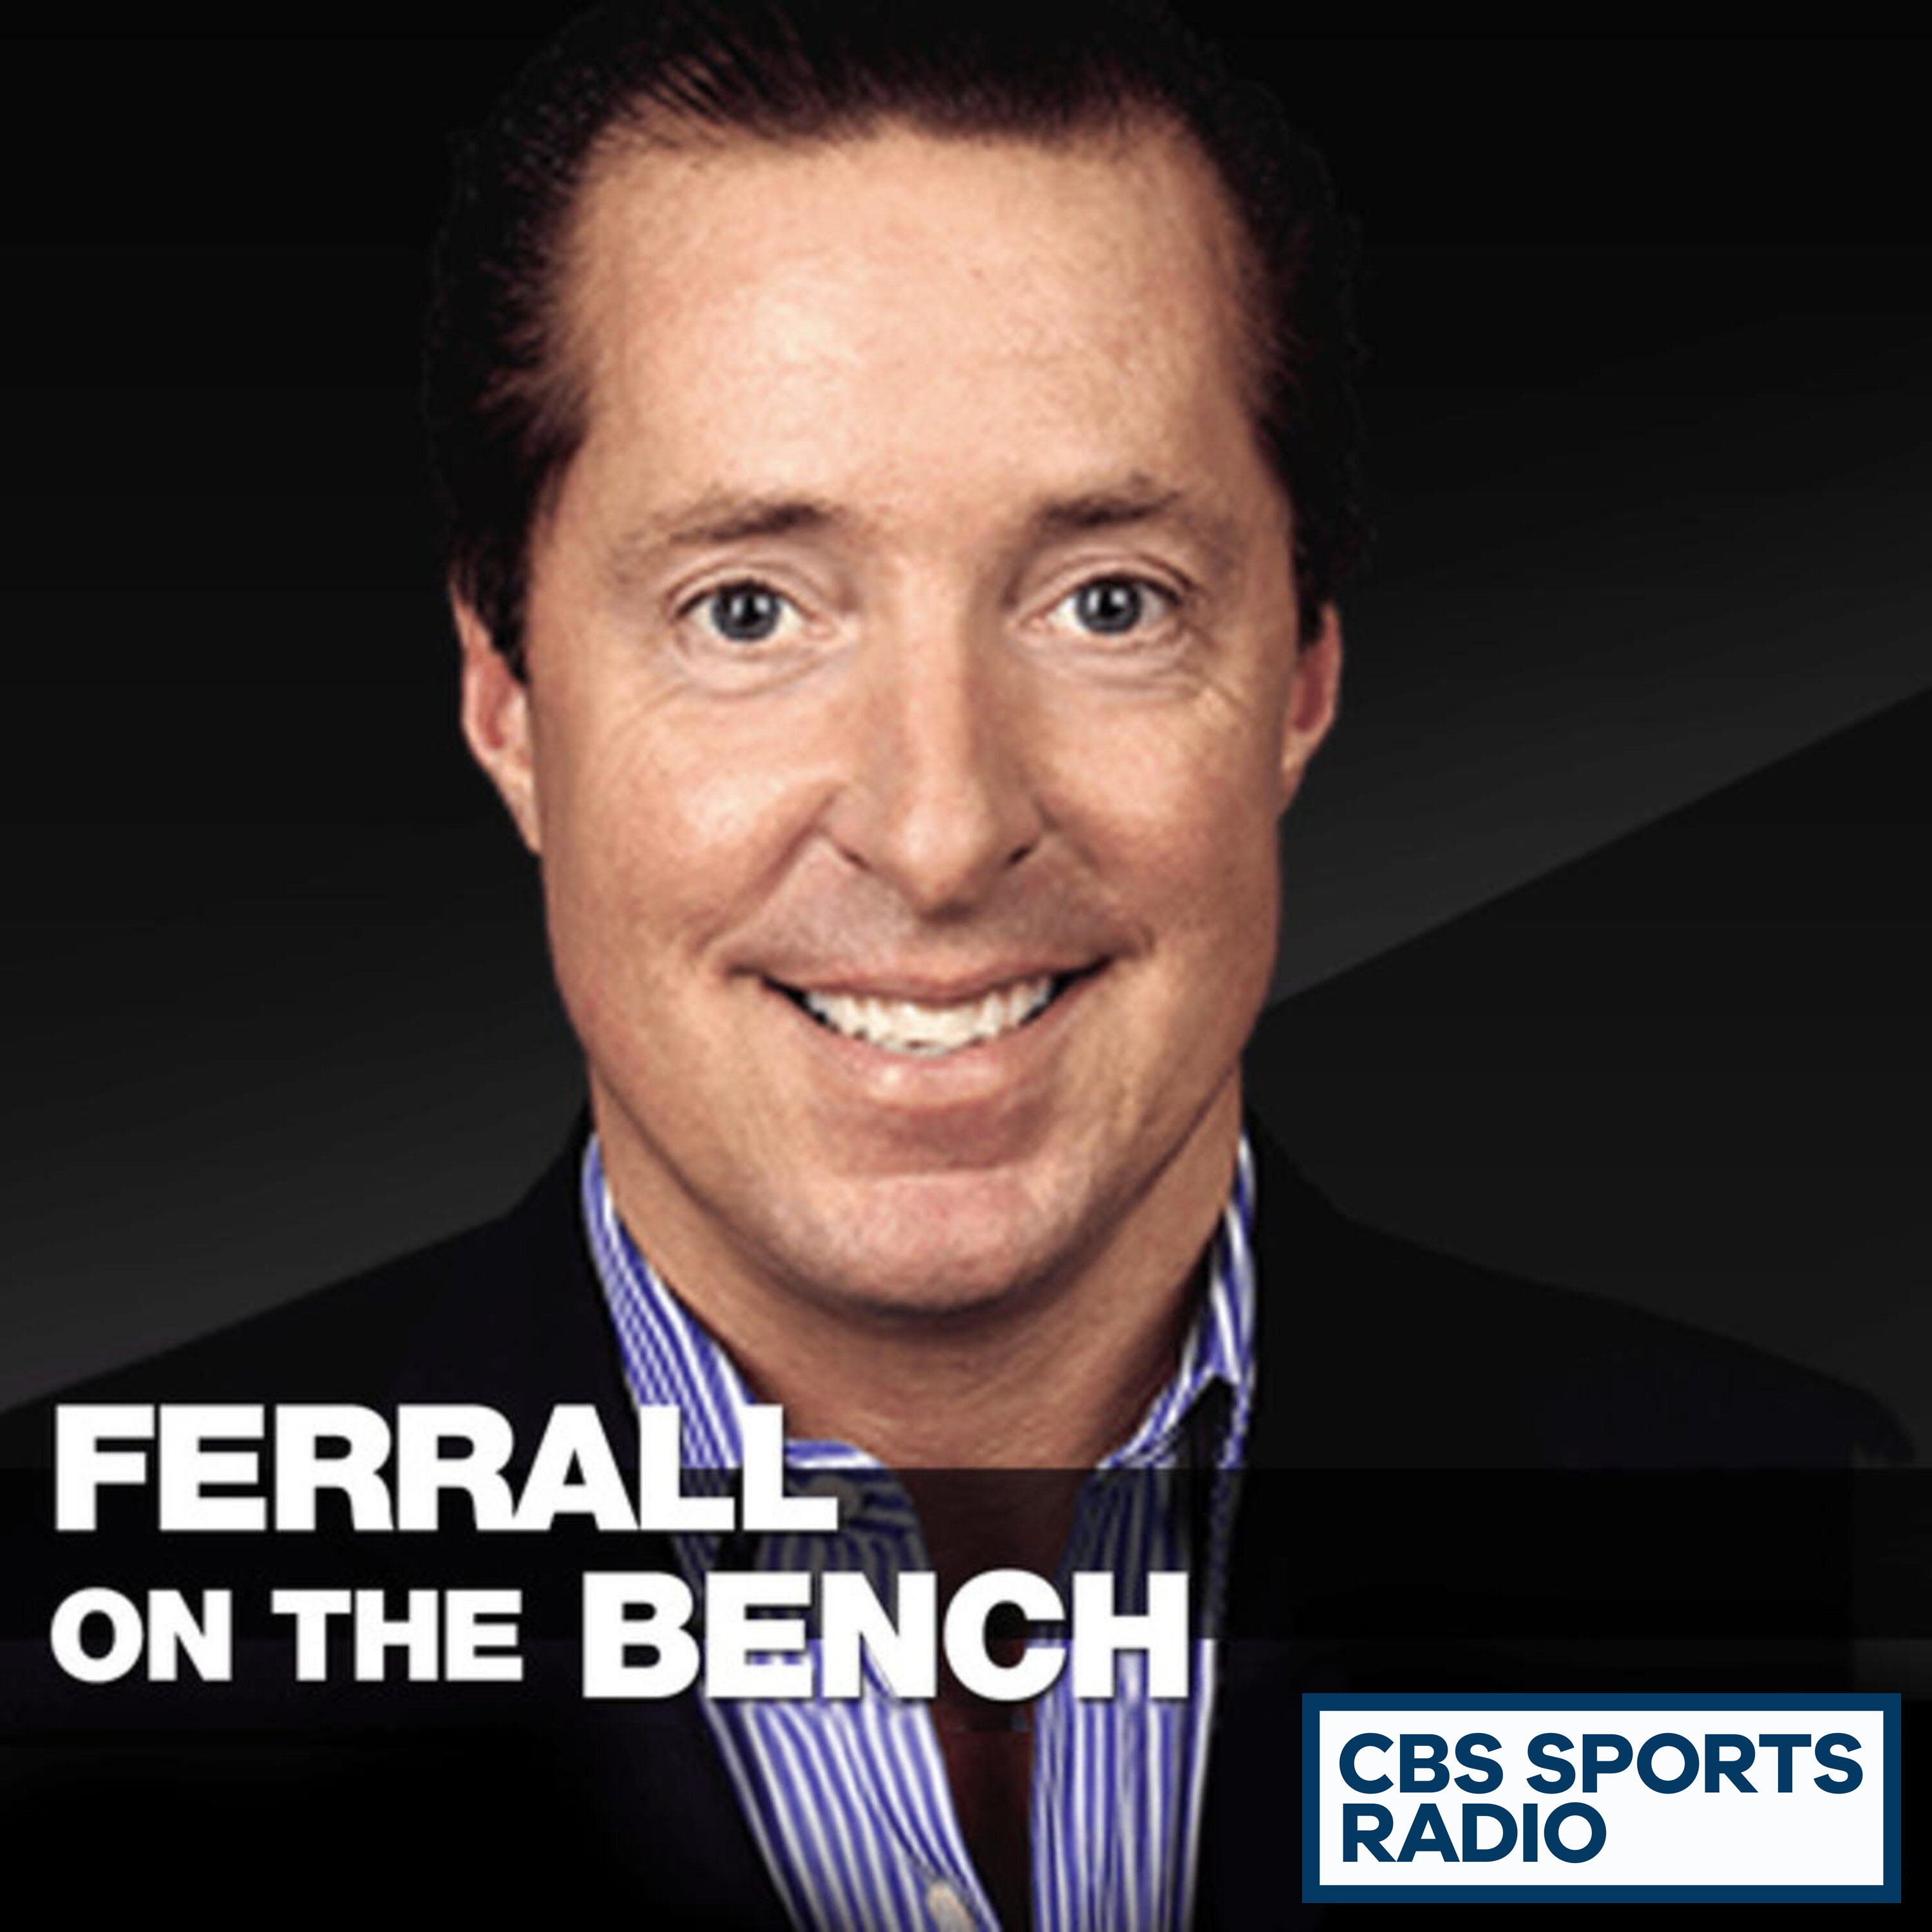 11-20-19 - Ferrall On The Bench - Ferrall on Leafs fire Mike Babcock